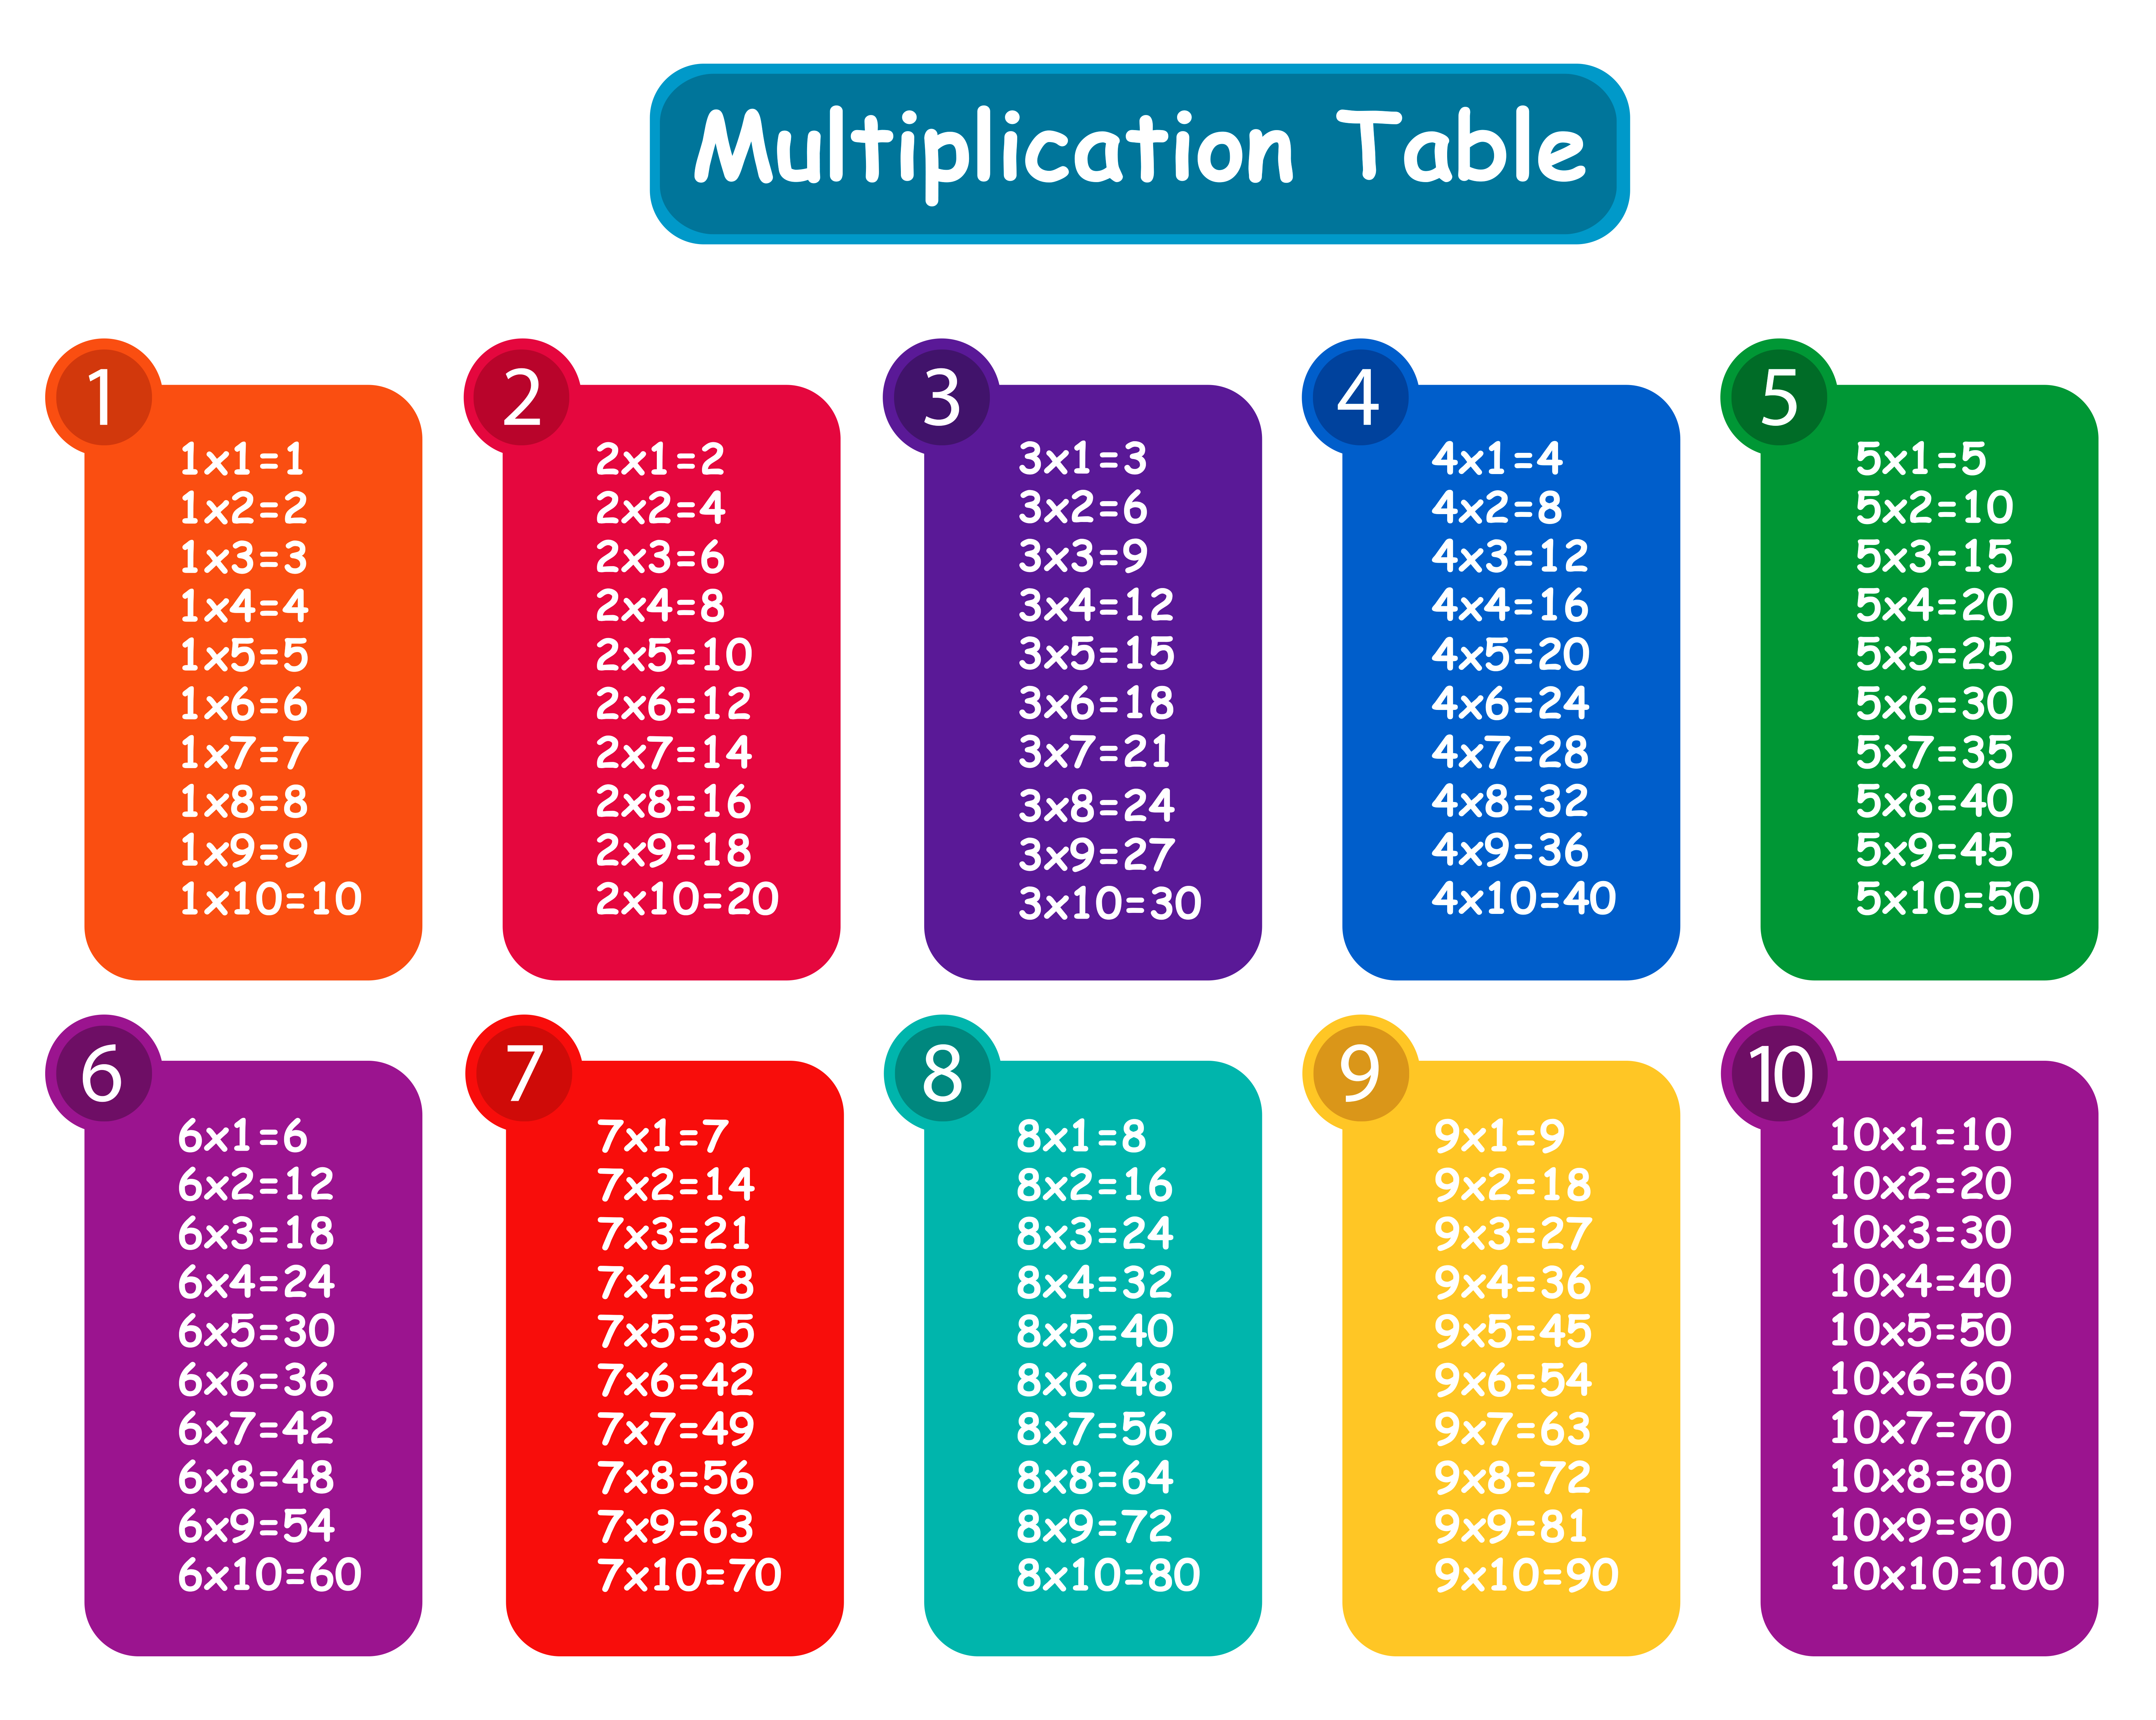 Colorful Multiplication Table PNG Clipart Quality Image And. Multiplication Table, Multiplication Table Printable, Multiplication